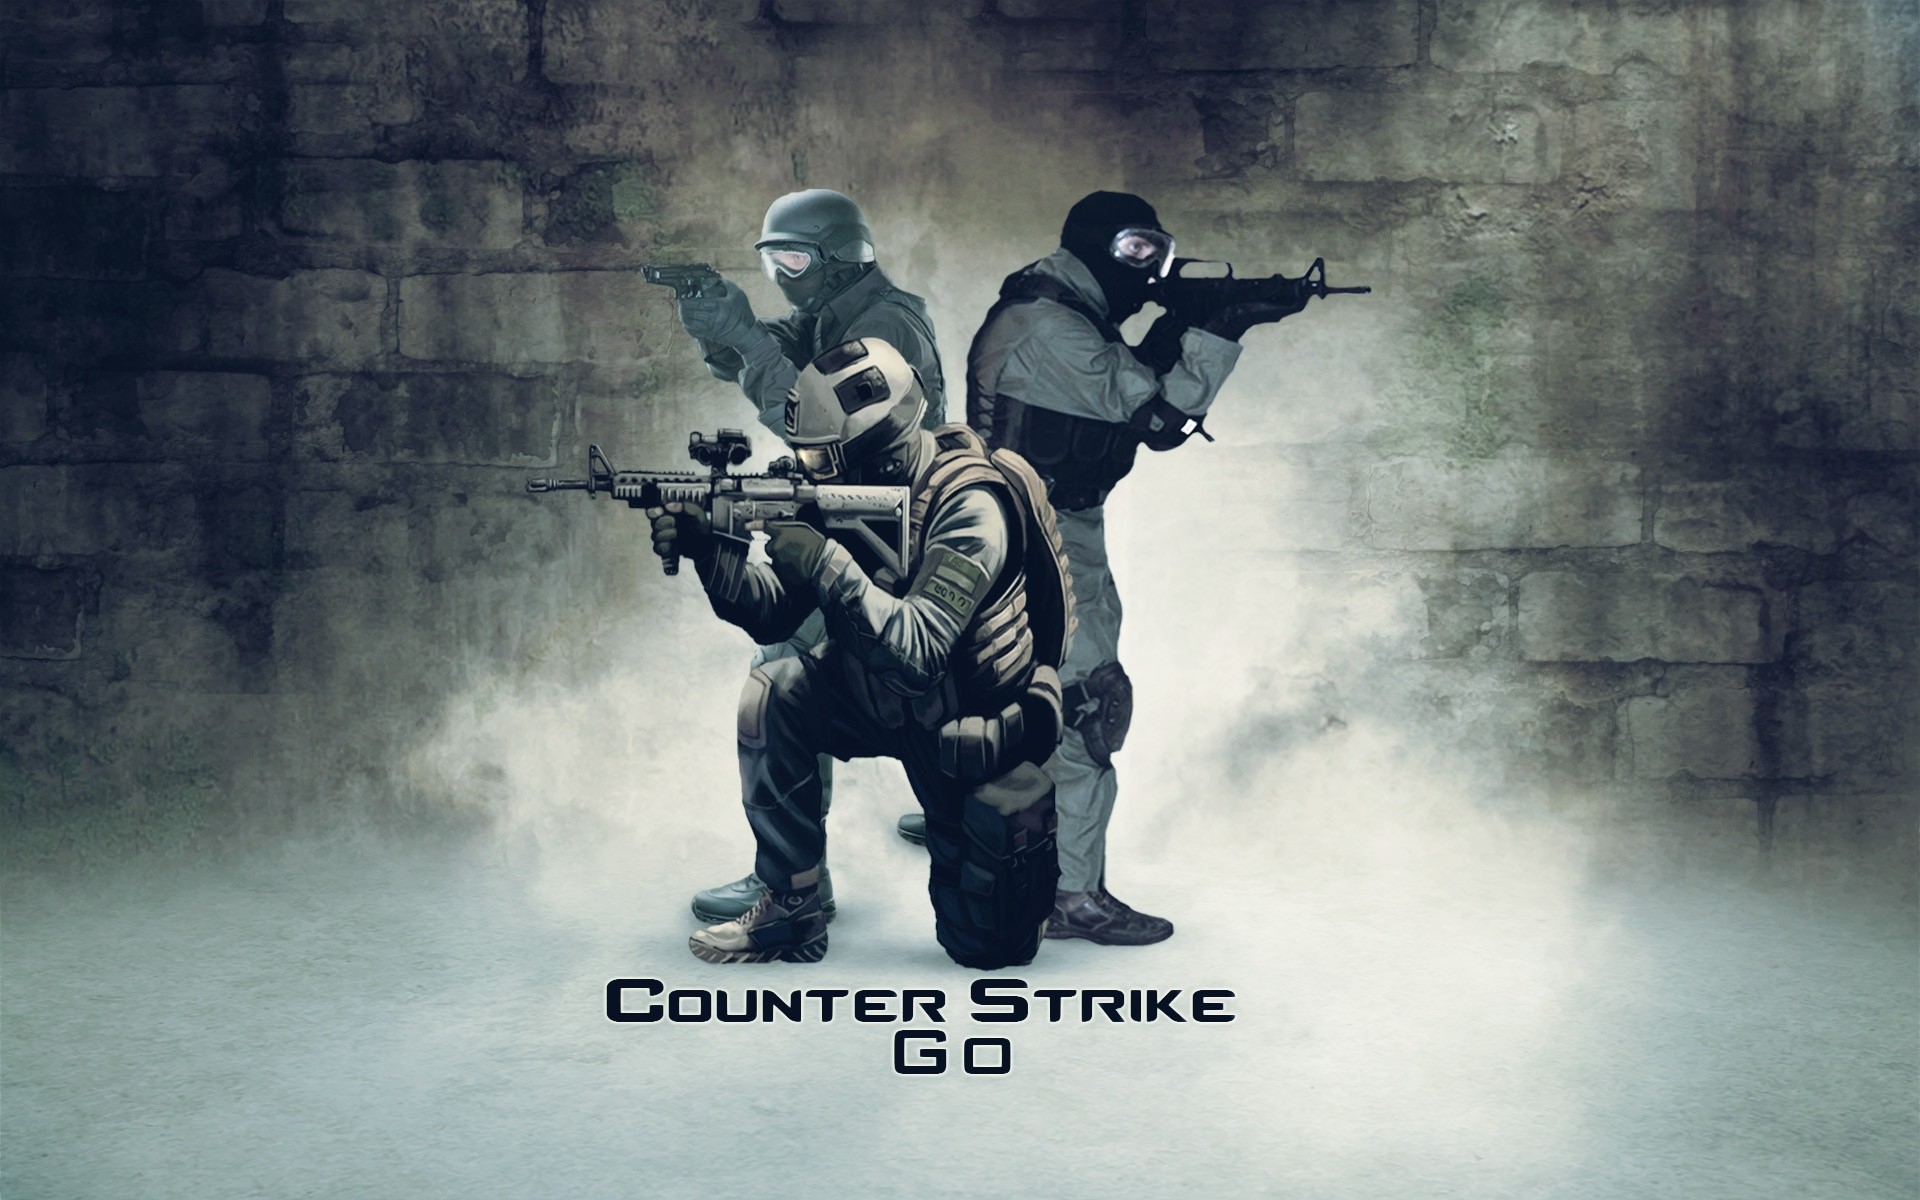 Counter Strike Global Offensive Counter Terrorist - Counter Strike Wallpaper Hd - HD Wallpaper 